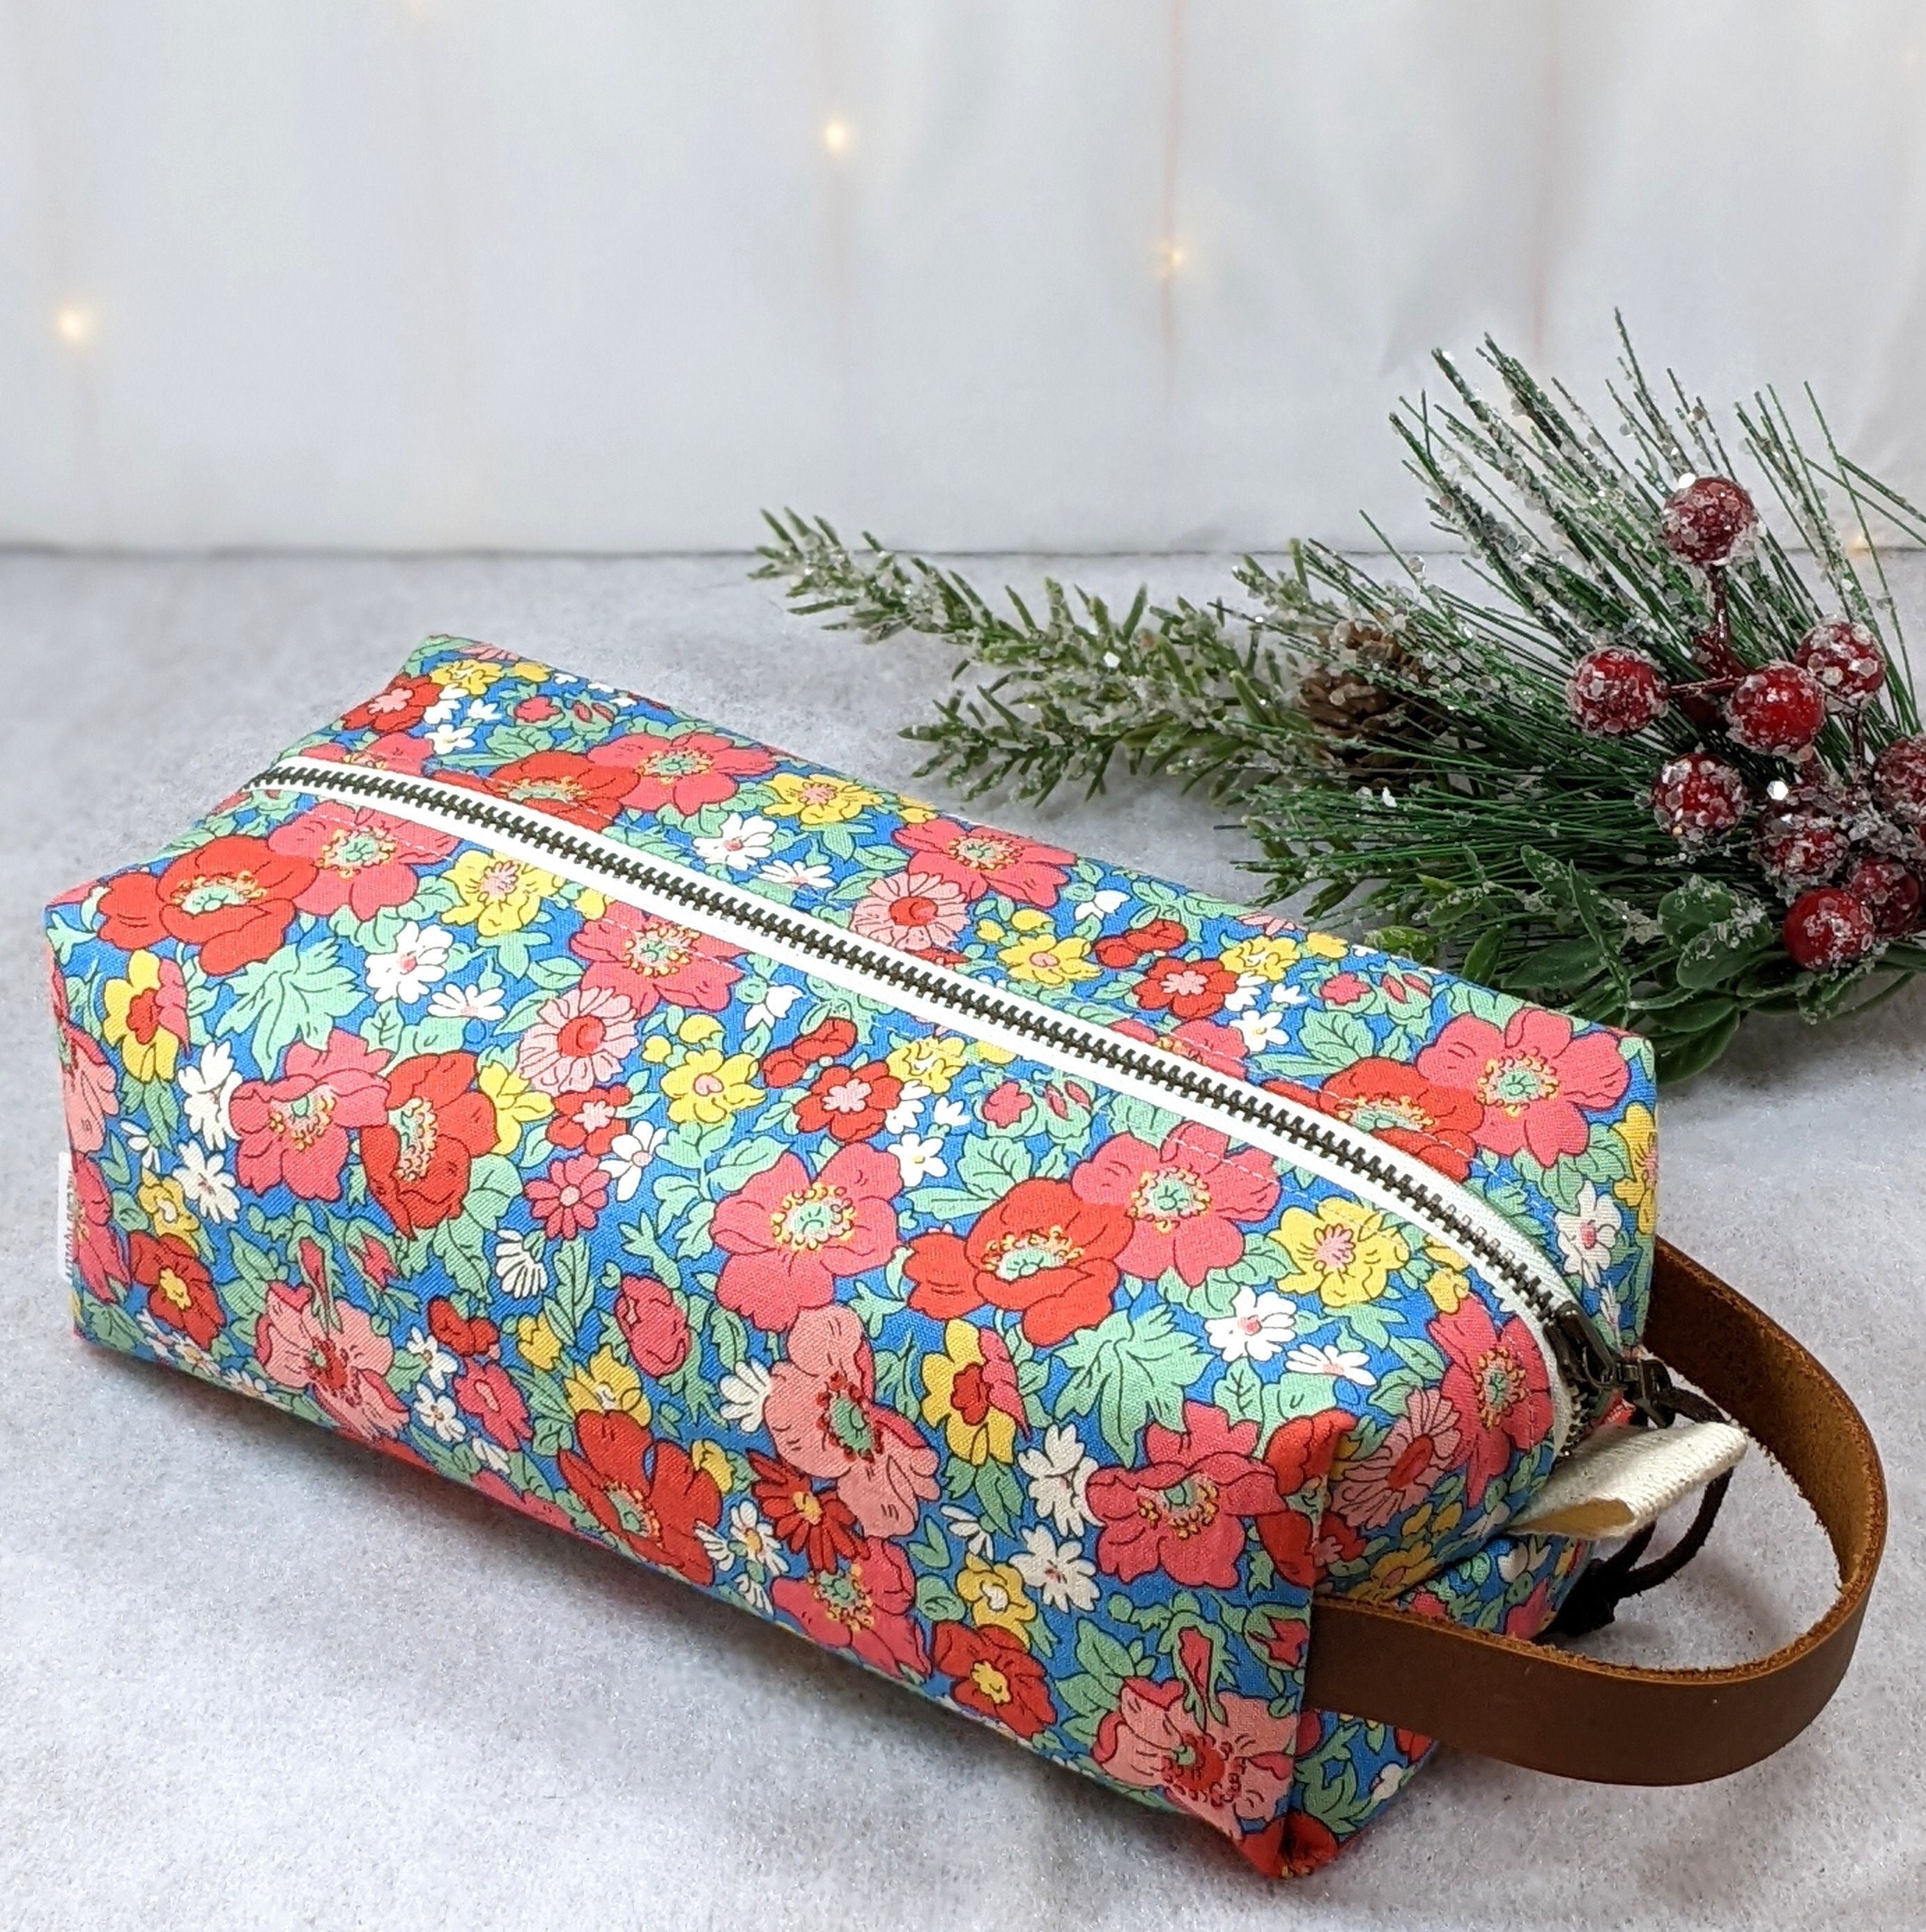 Travel Bag Cosmetics And Toiletries Liberty Print By Undercover